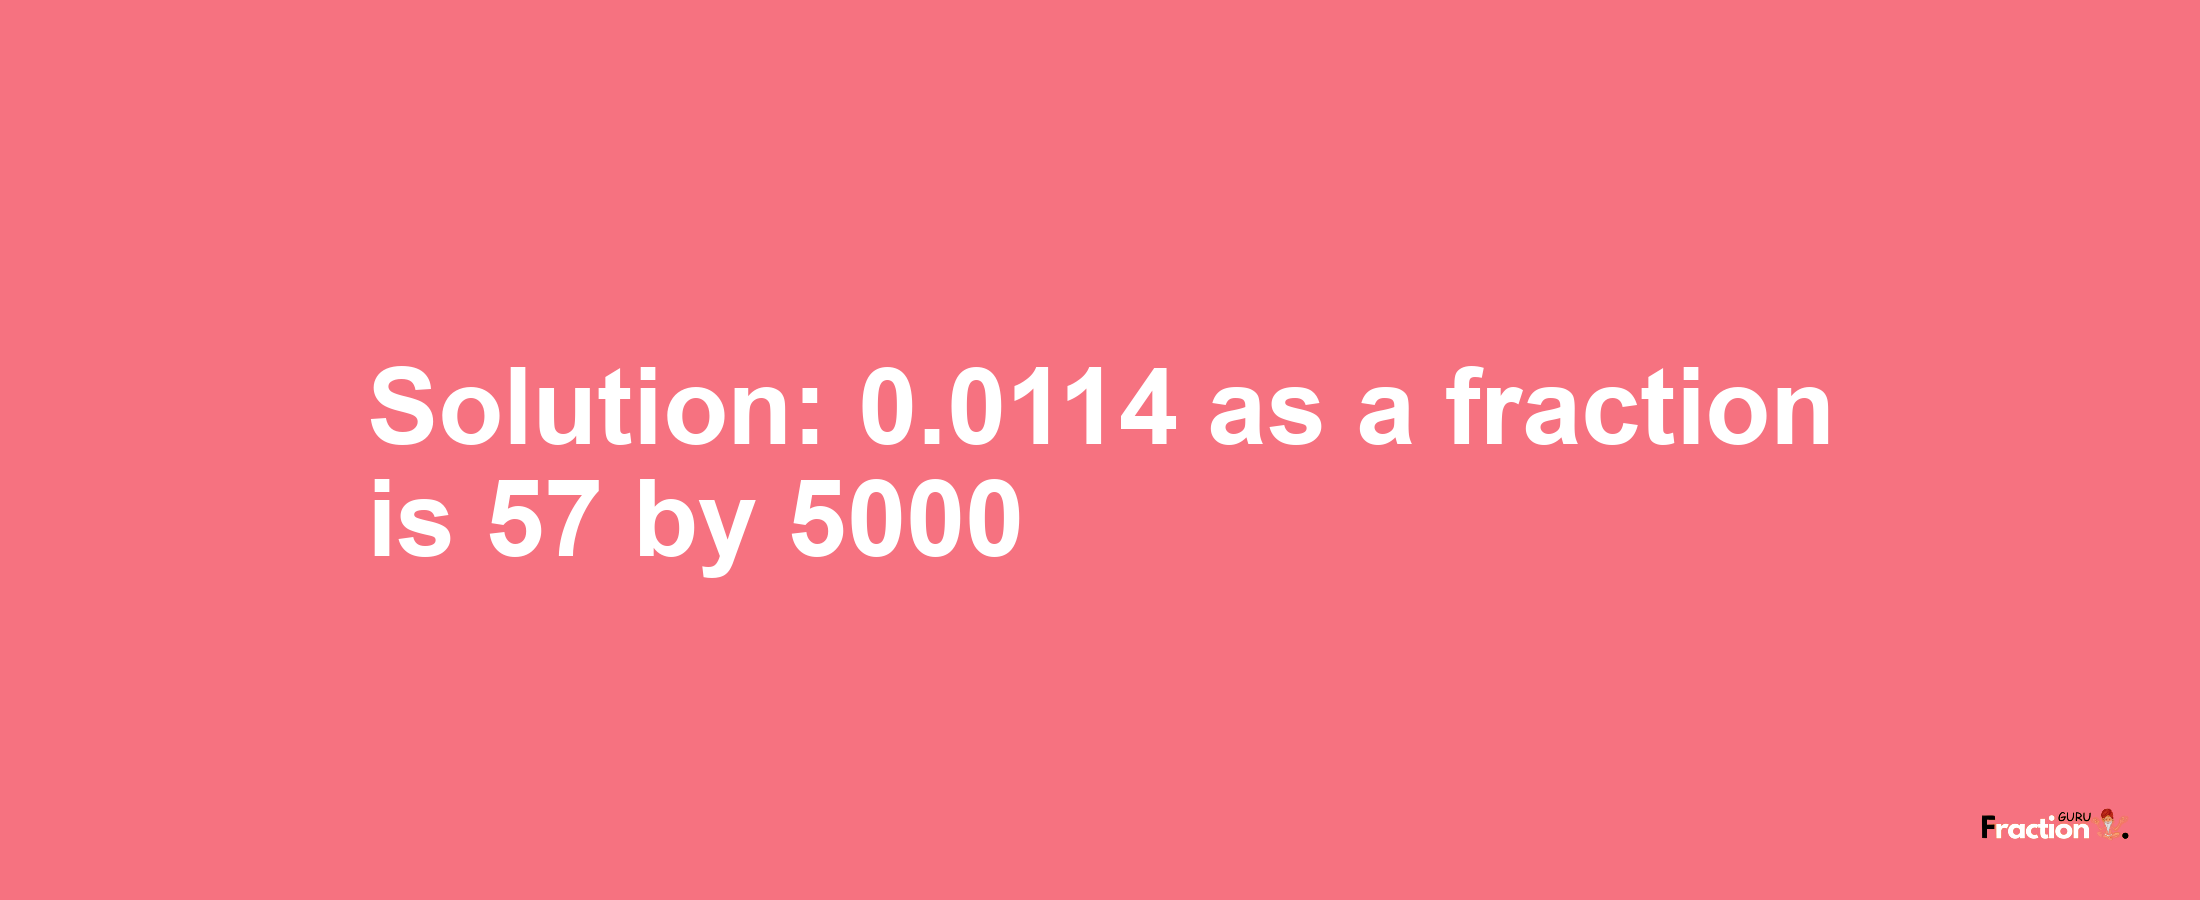 Solution:0.0114 as a fraction is 57/5000